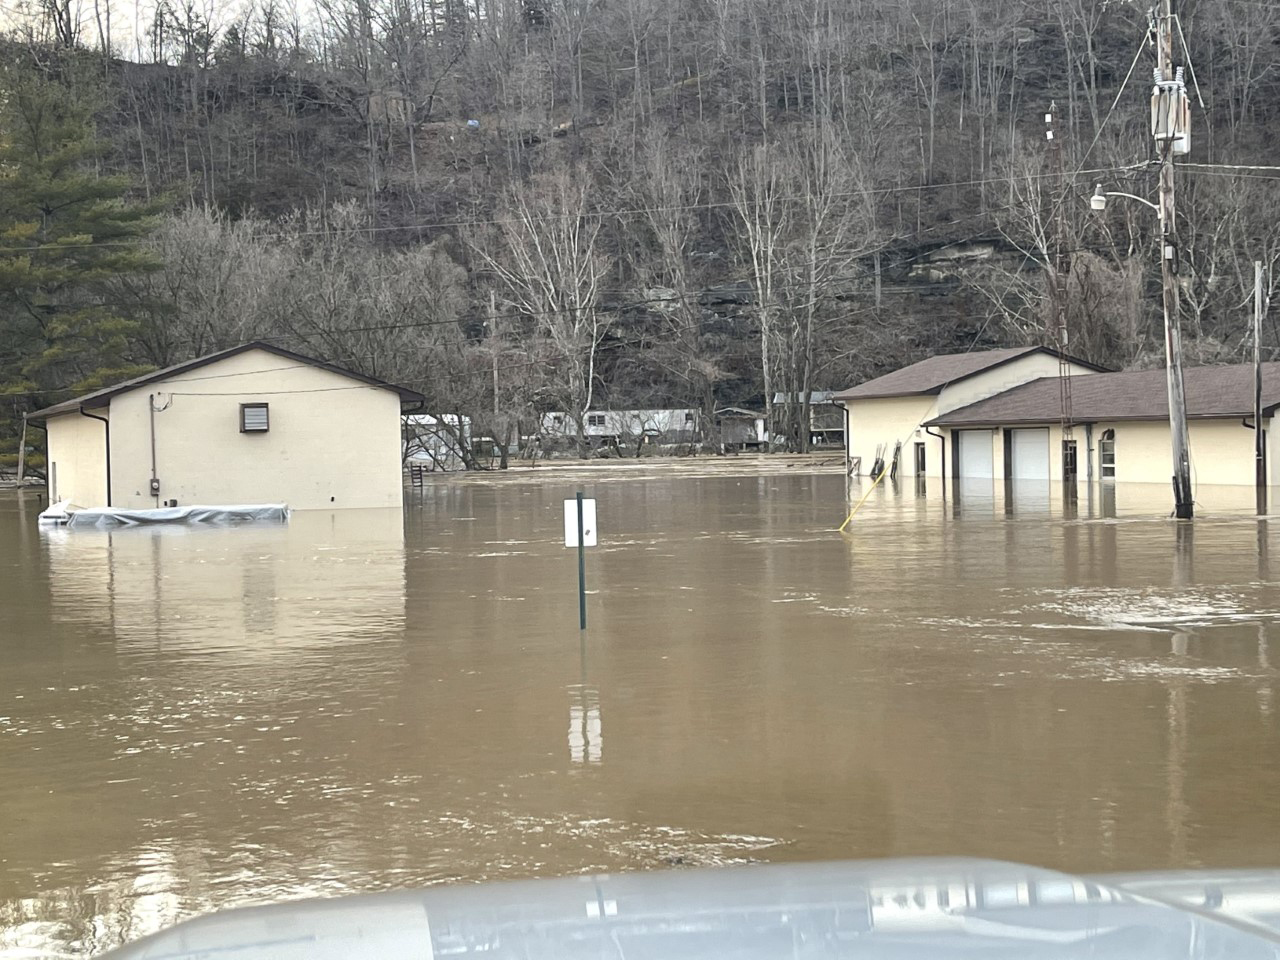 Torrential rains caused flooding at UK's Robinson Center for Appalachian Resource Sustainability. Photo by Daniel Wilson